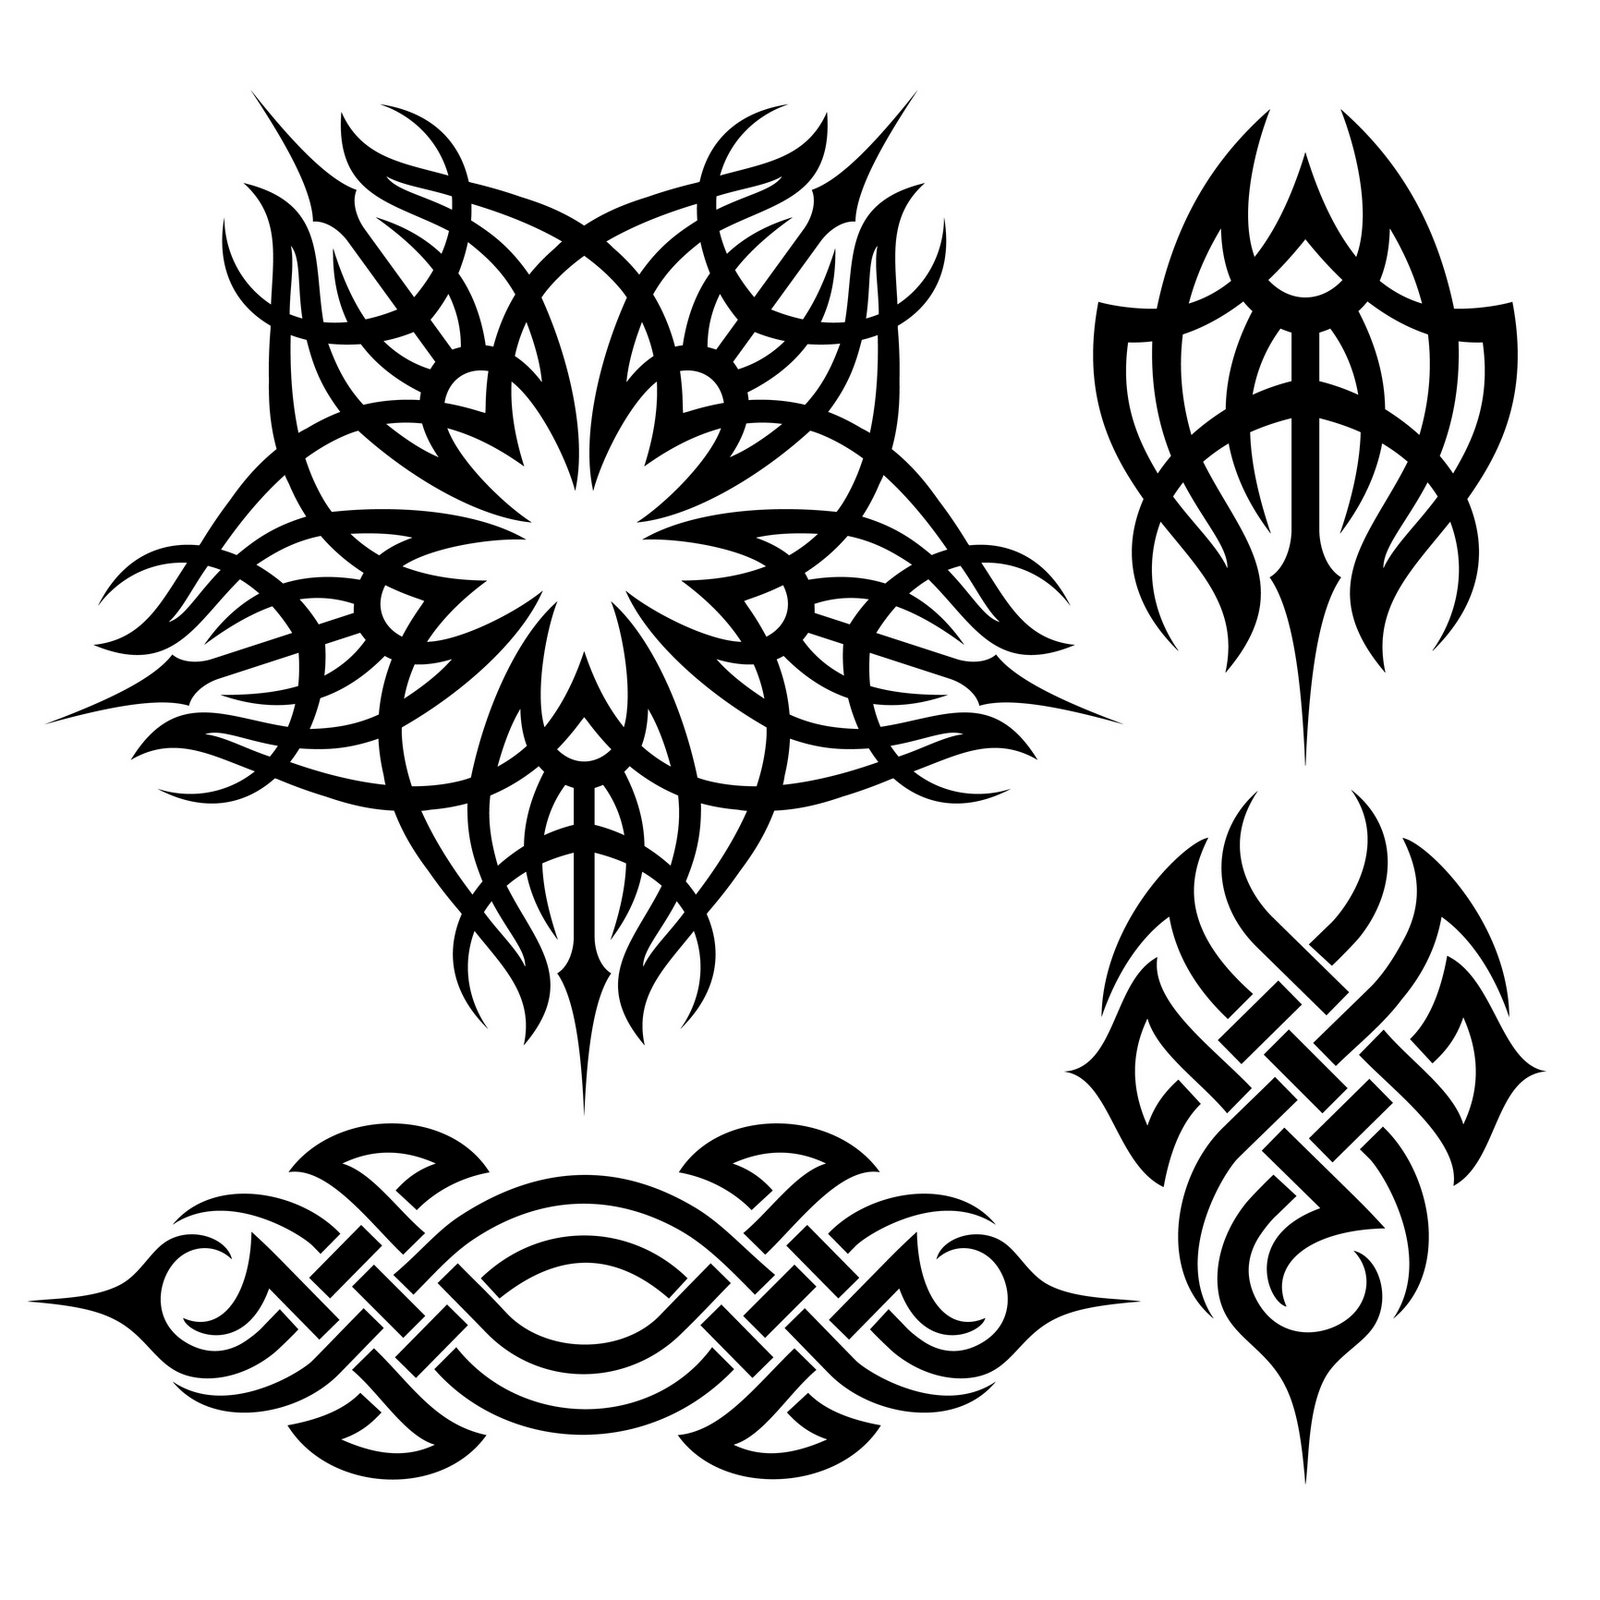 Top Ambigram Tattoo Ideas: Designs for All